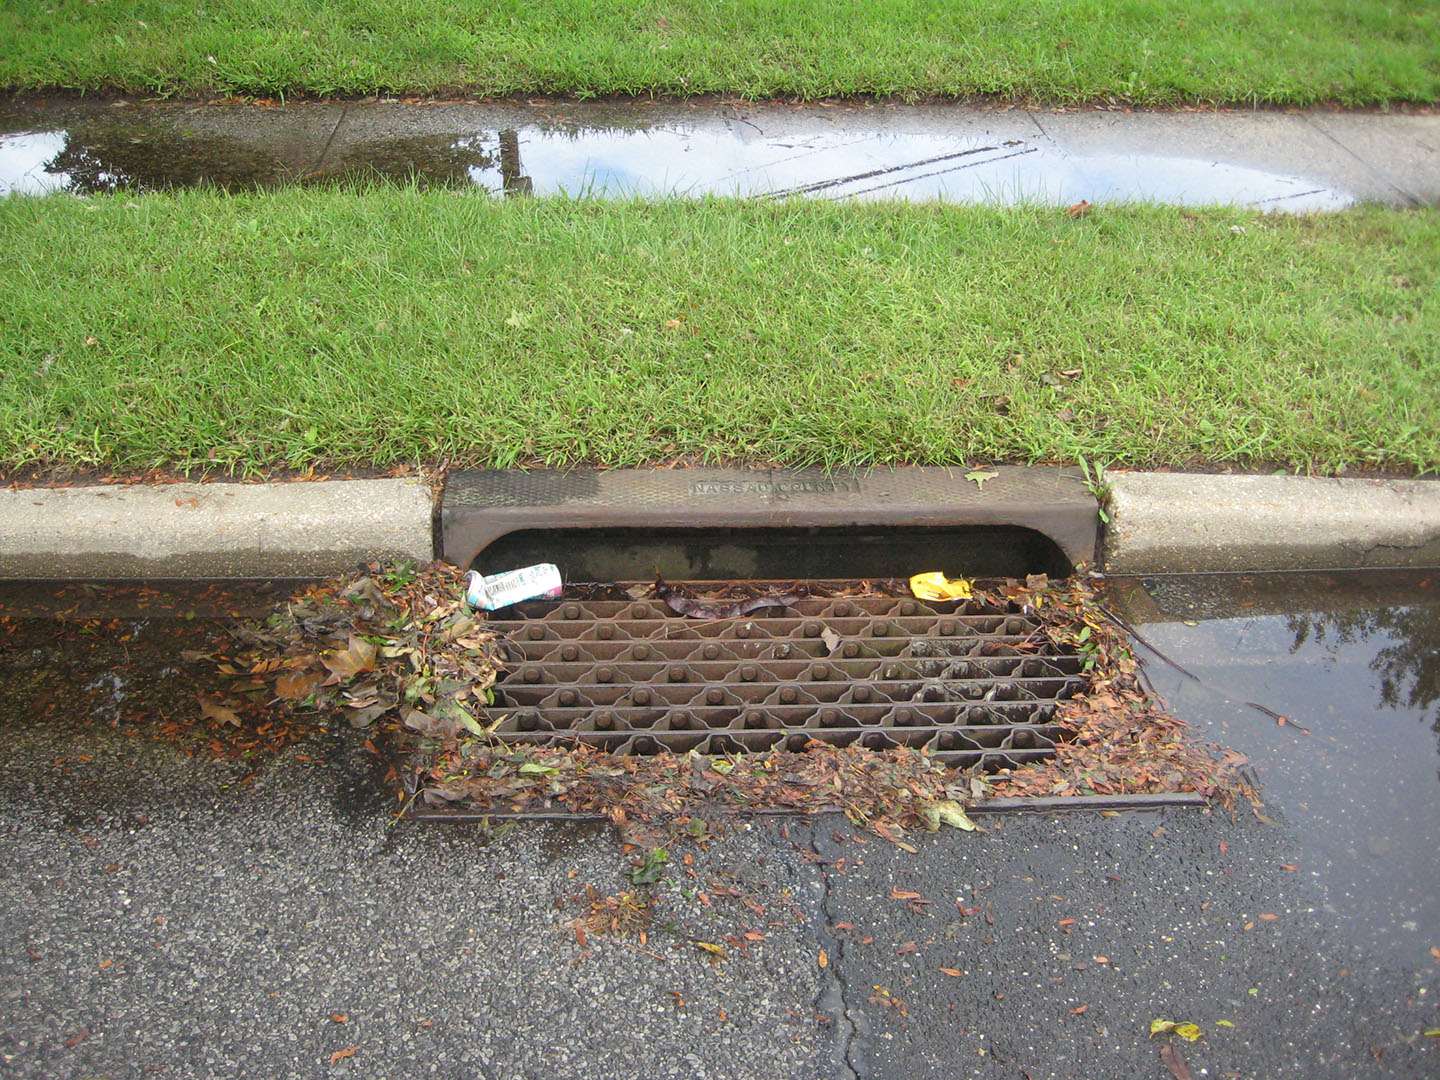 storm drain, ms4, ms4 general permit, stormwater, stormwater permitting, stormwater compliance, water quality